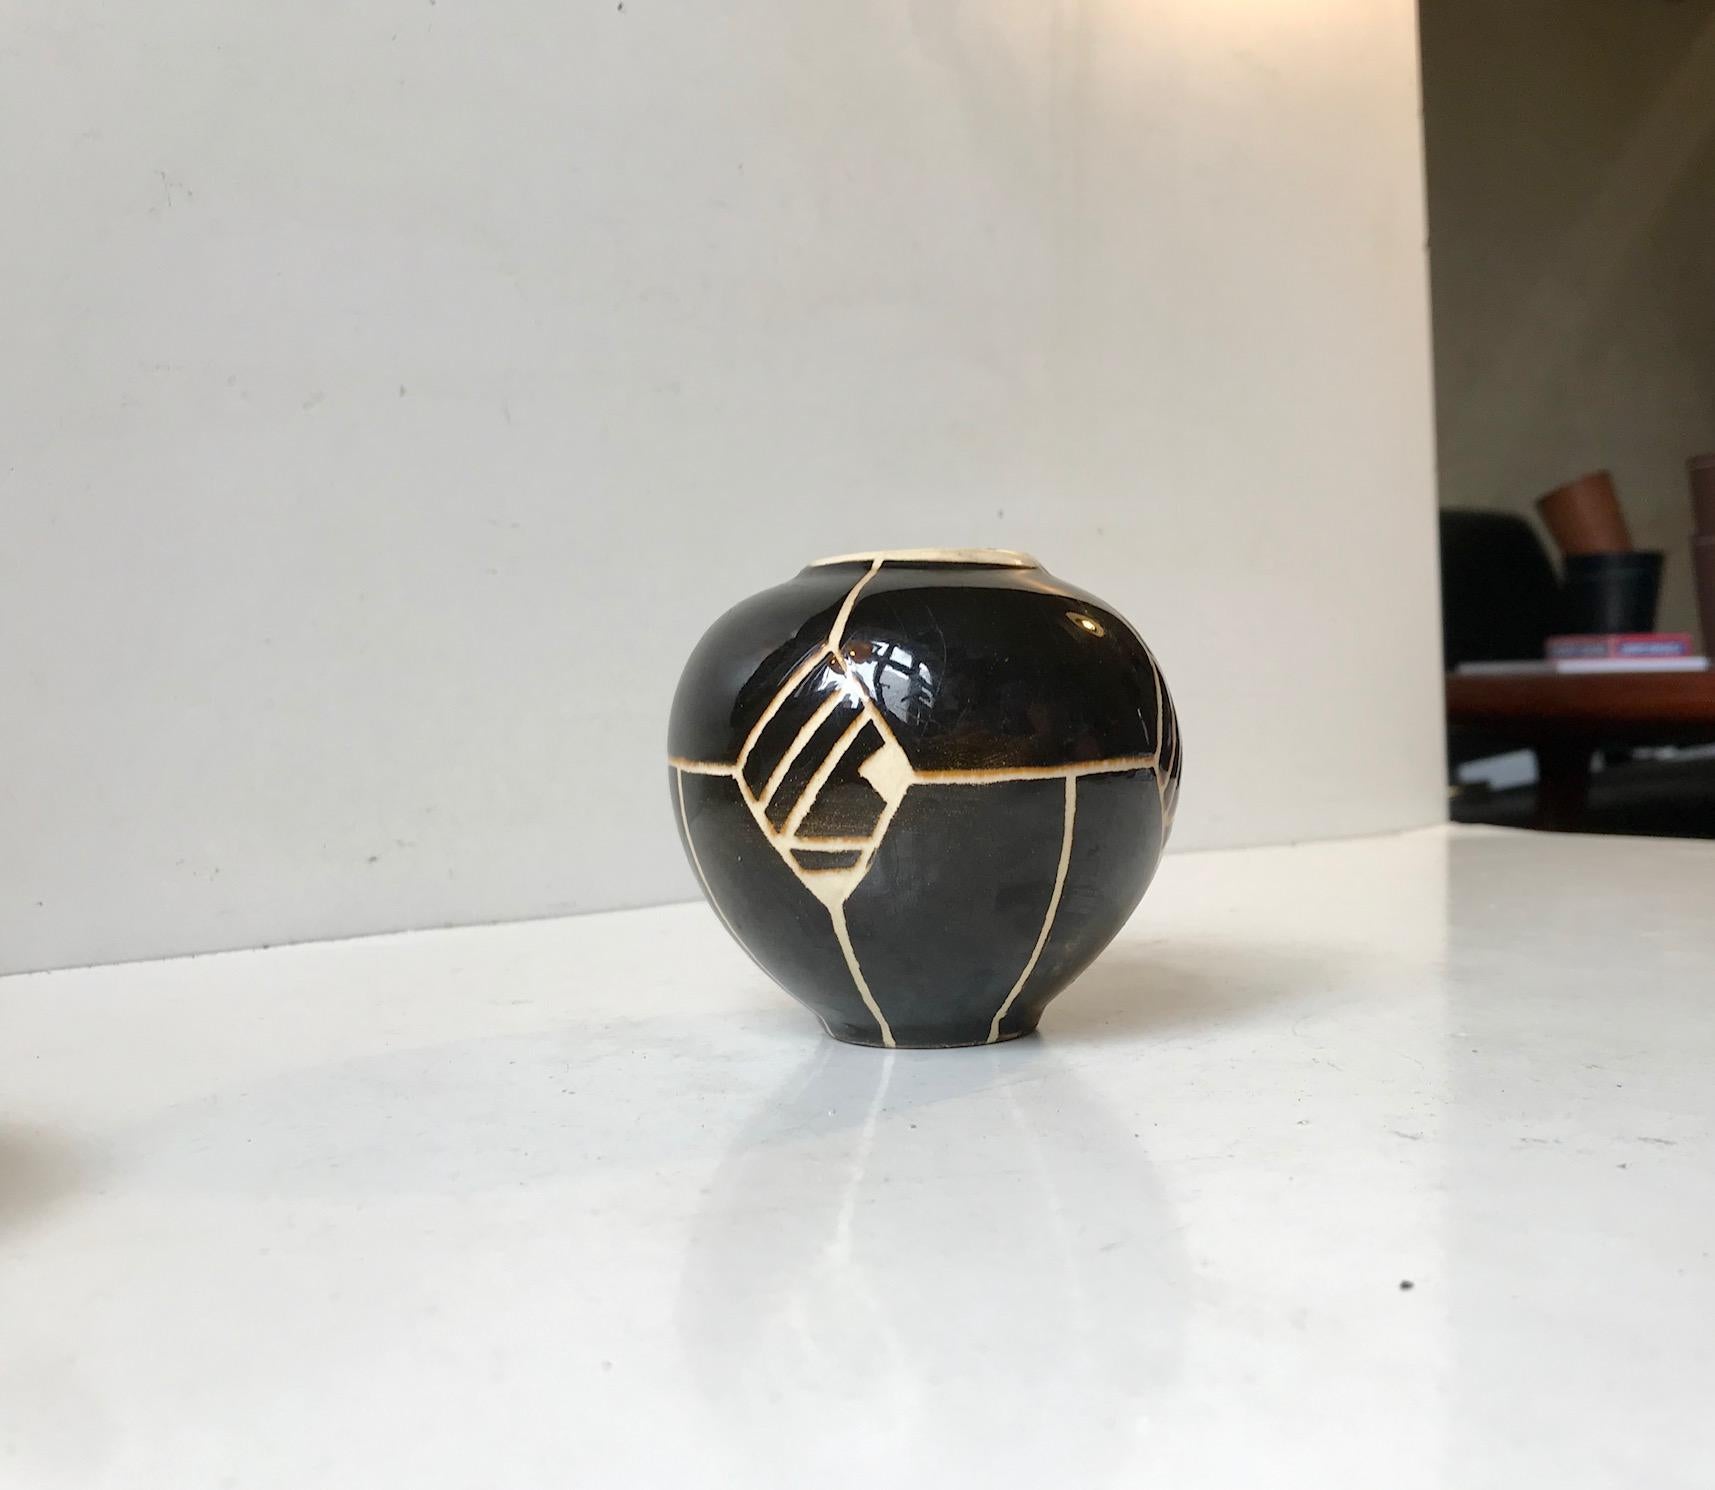 Small Ball shaped ceramic vase in black and creamy white glazes. Its executed with geometric motifs. It was made by Knabstrup in Denmark during the 1920s or 30s in a style derived from the French and German Art Deco era pottery.